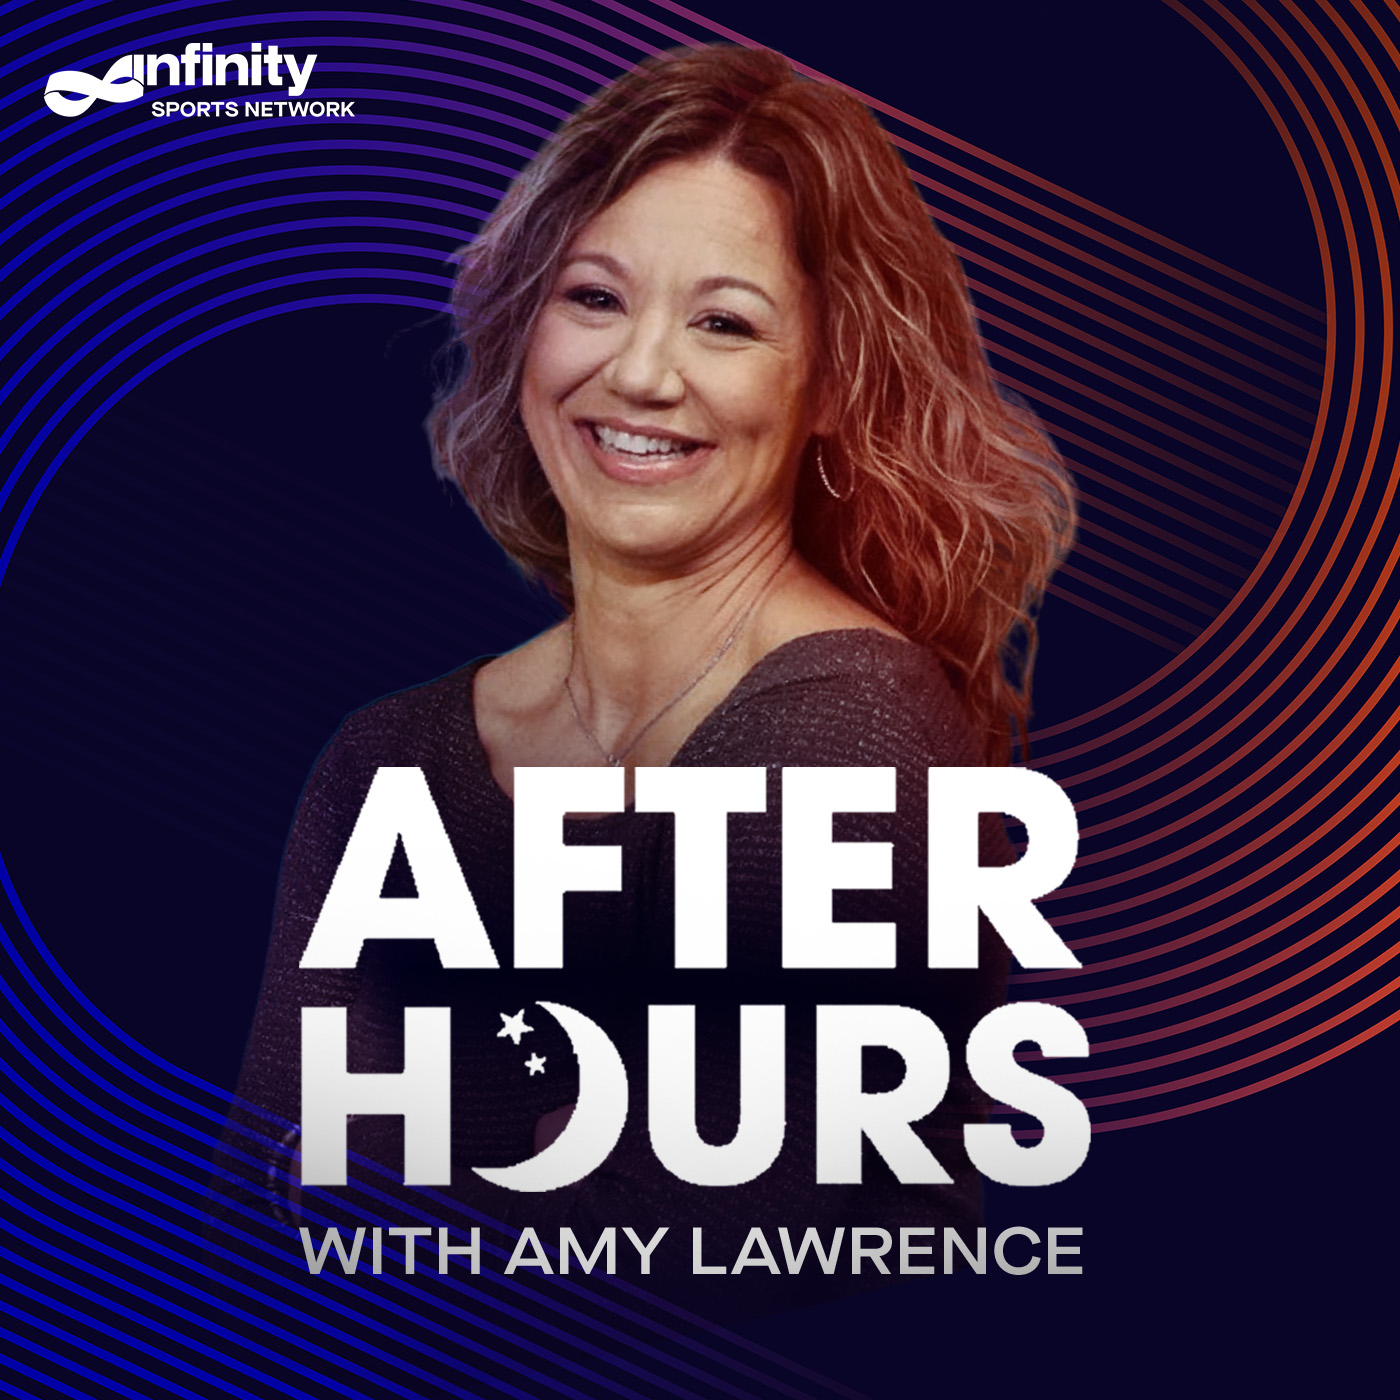 4-19-22 After Hours with Amy Lawrence PODCAST: Hour 4